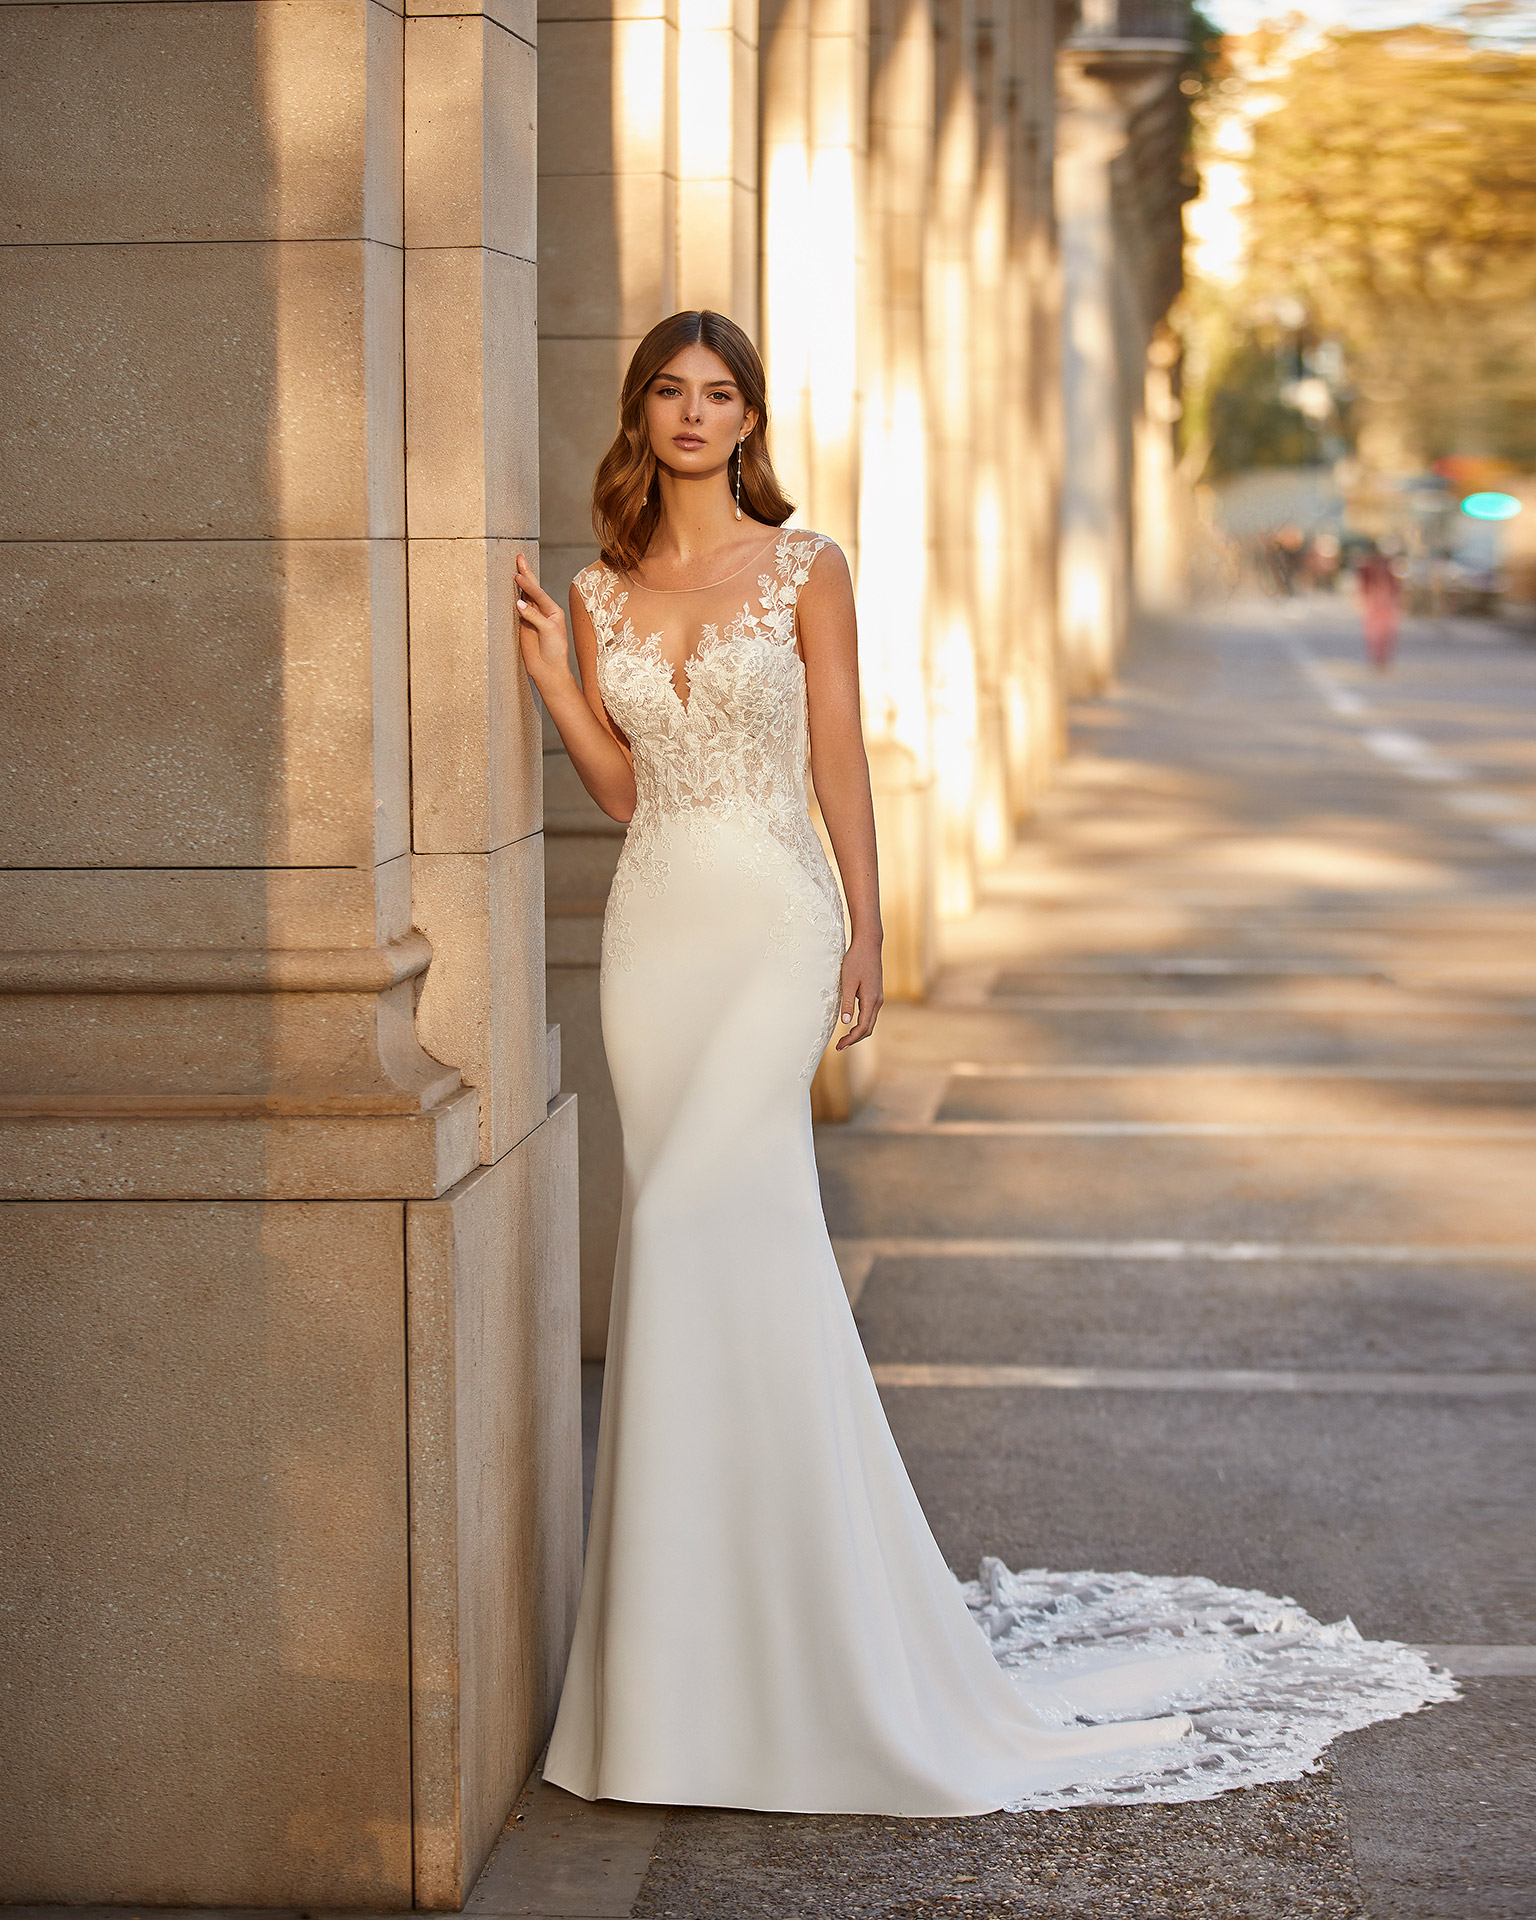 Romantic sheath-style wedding dress made of stretch crepe; with an illusion overlay over a sweetheart neckline, and a button-up sheer back. Unique Luna Novias outfit made of stretch crepe combined with beadwork lace. LUNA_NOVIAS.